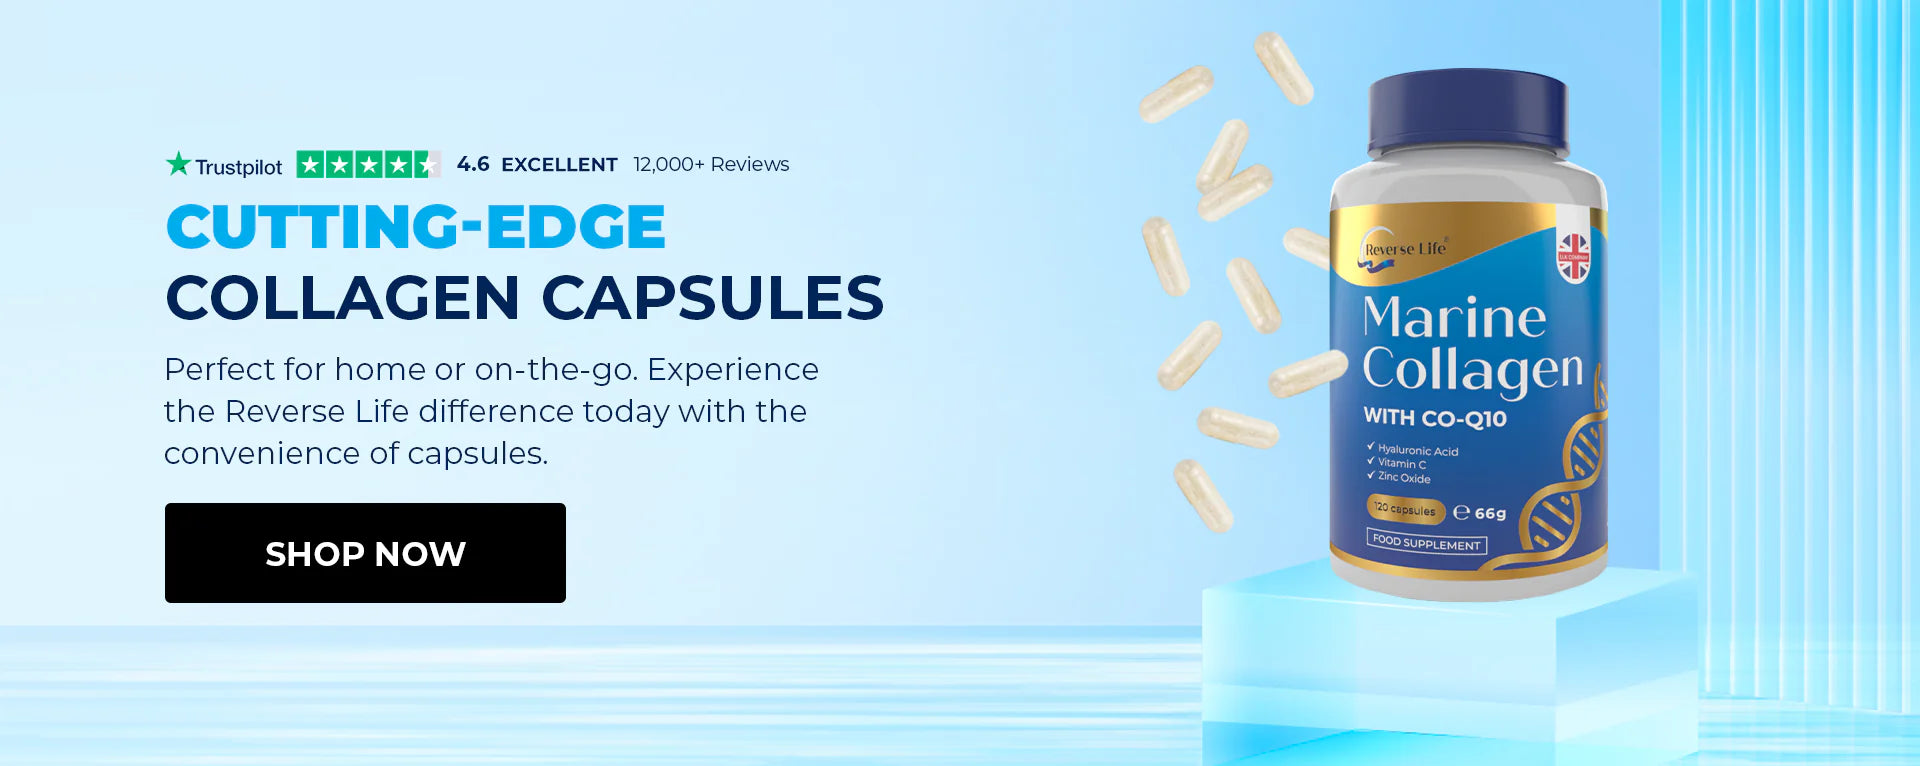 Cutting-edge Collagen Capsules. Perfect for home or on-the-go. Experience the Reverse Life difference today with the convenience of capsules.